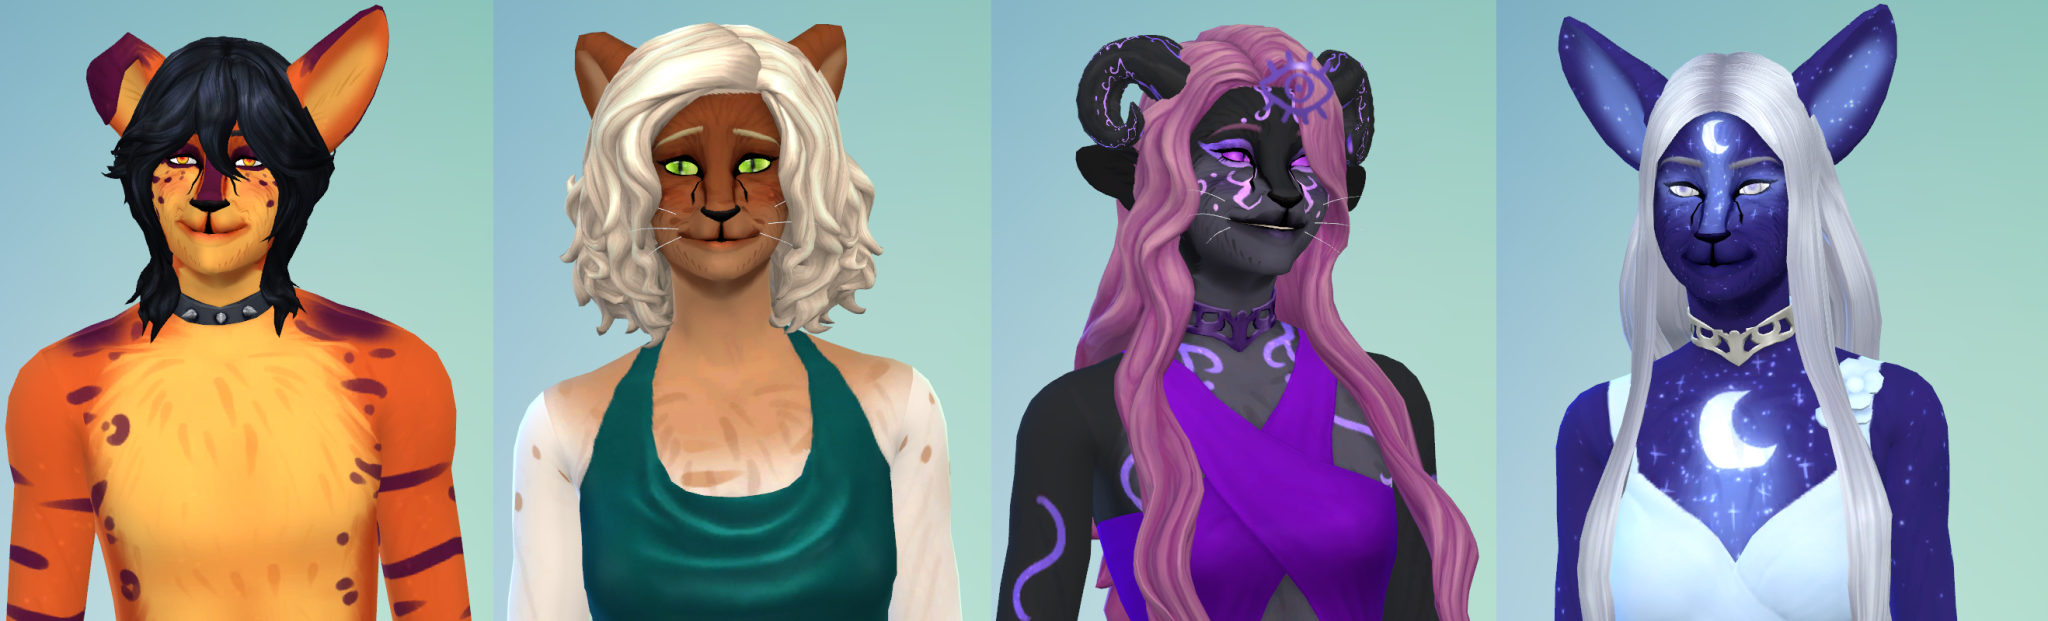 SIMS 4 Wolf. SIMS 4 furry SIMS. Fur Skin SIMS 4. SIMS 4 Mods Ears Wolf. Симс мод на уши